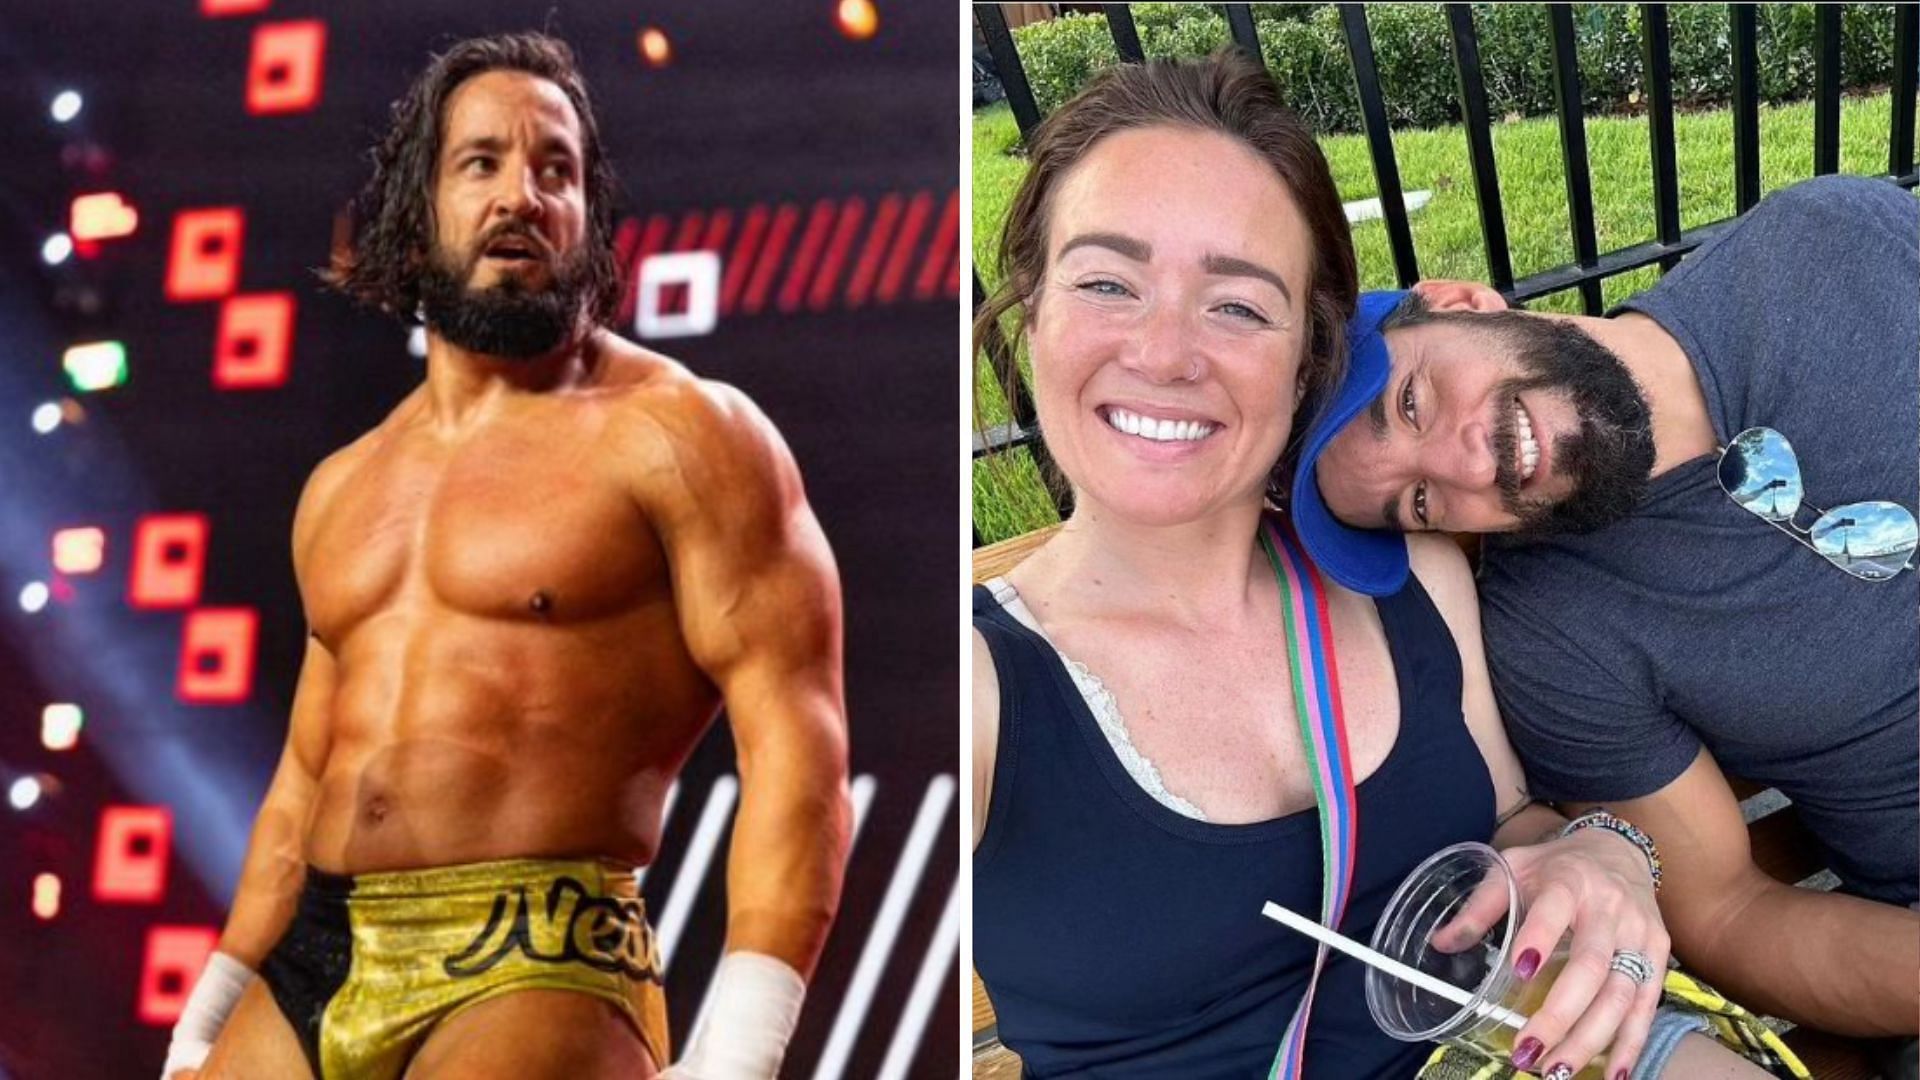 Tony Nese is a former WWE Cruiserweight Champion [Image credits: star